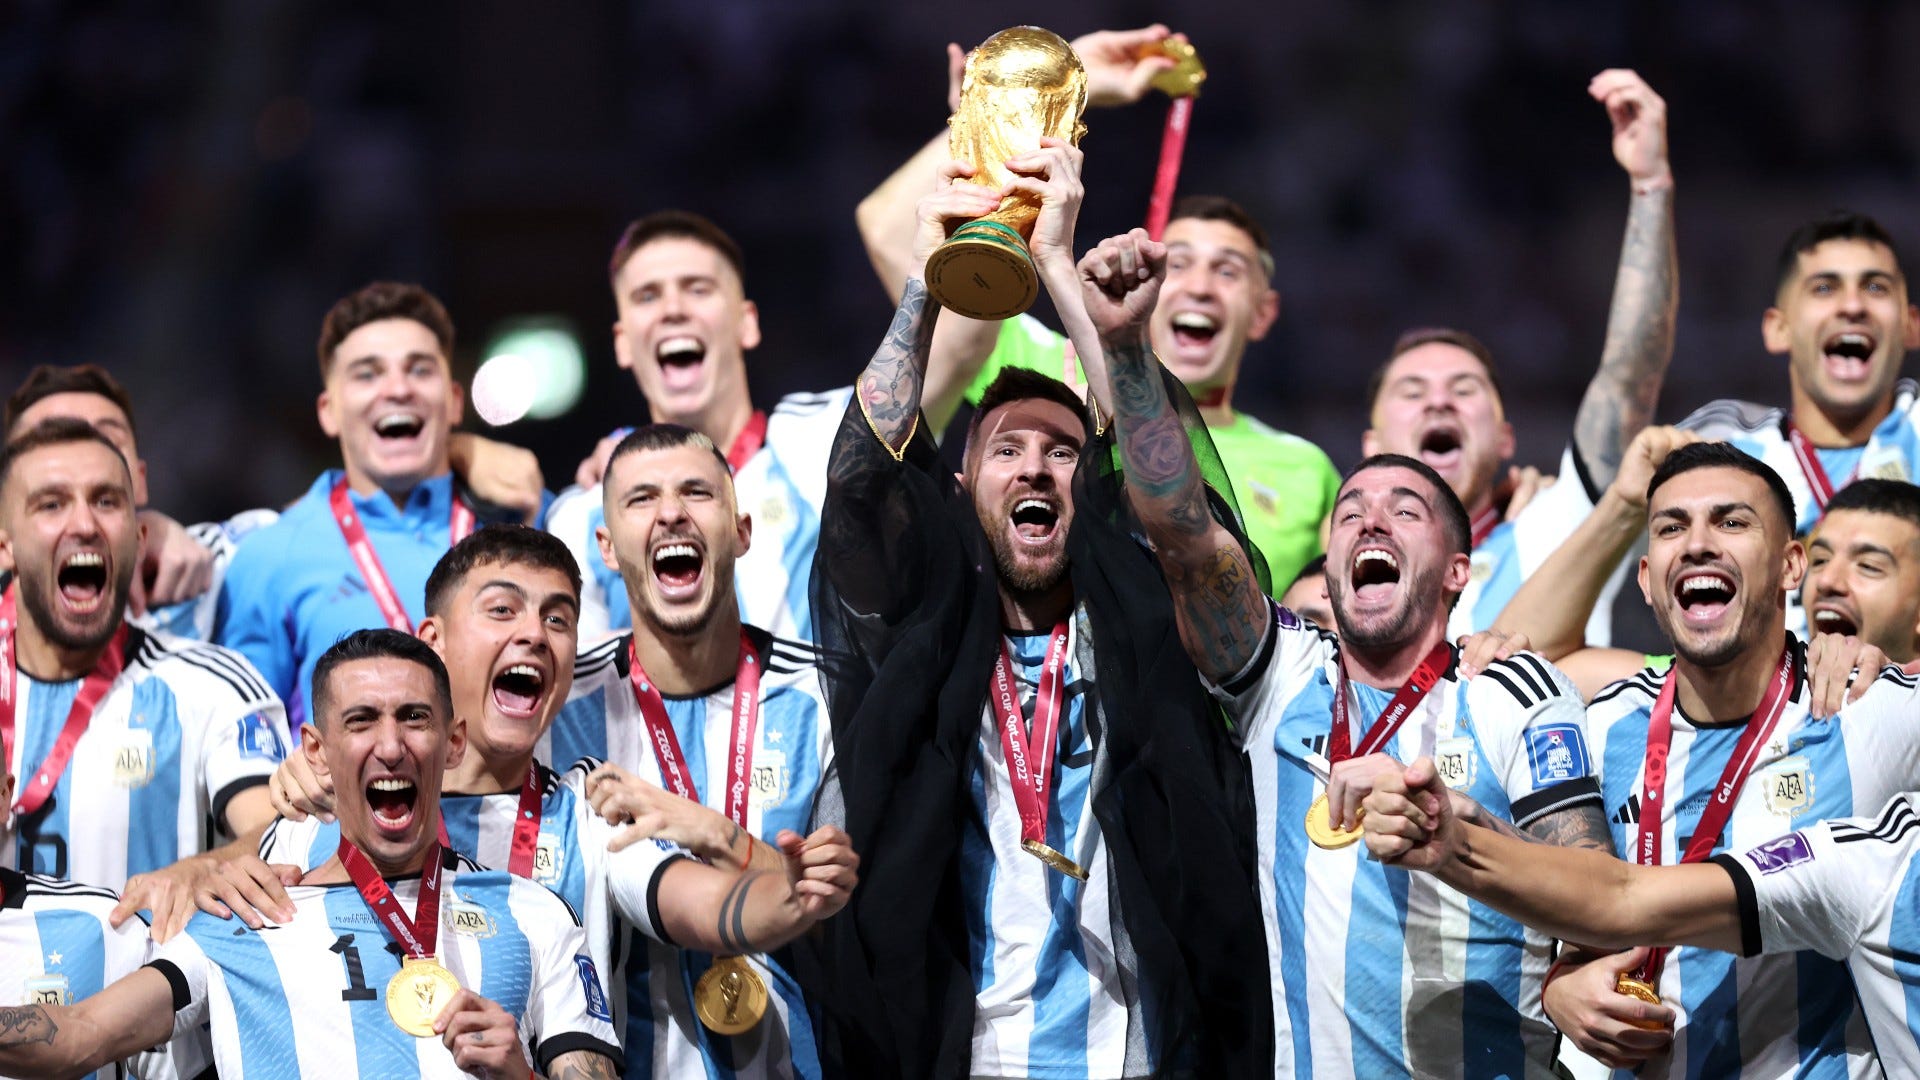 WATCH: Messi lifts World Cup trophy for Argentina as thrilling penalty shootout victory over France delivers ultimate prize to GOAT | Goal.com US